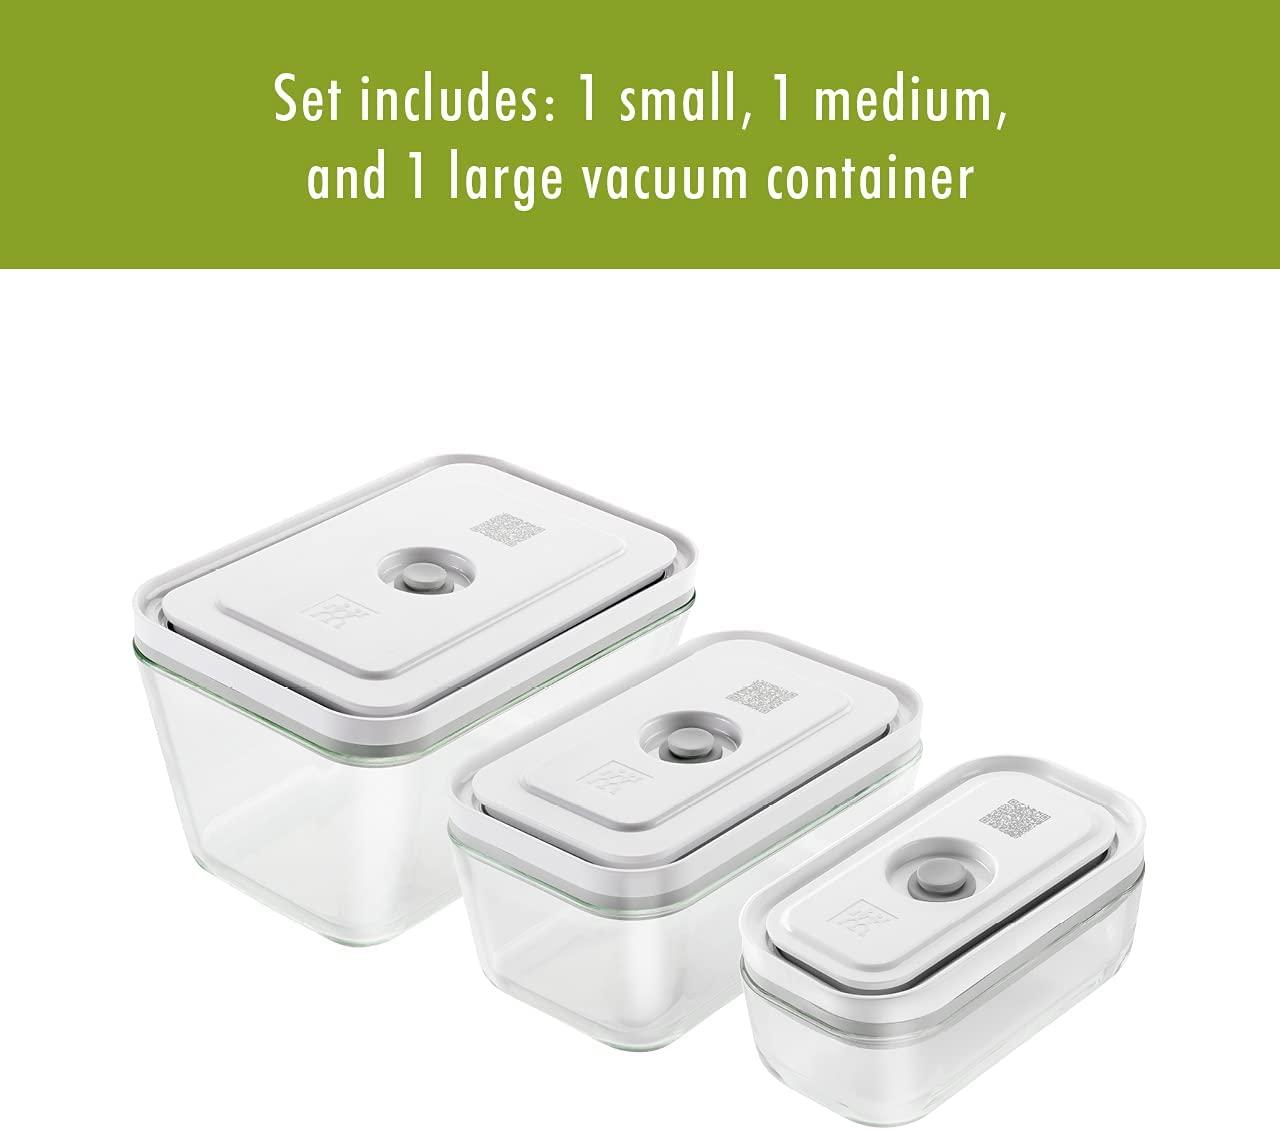 ZWILLING Small Fresh & Save Lunch Box + Reviews